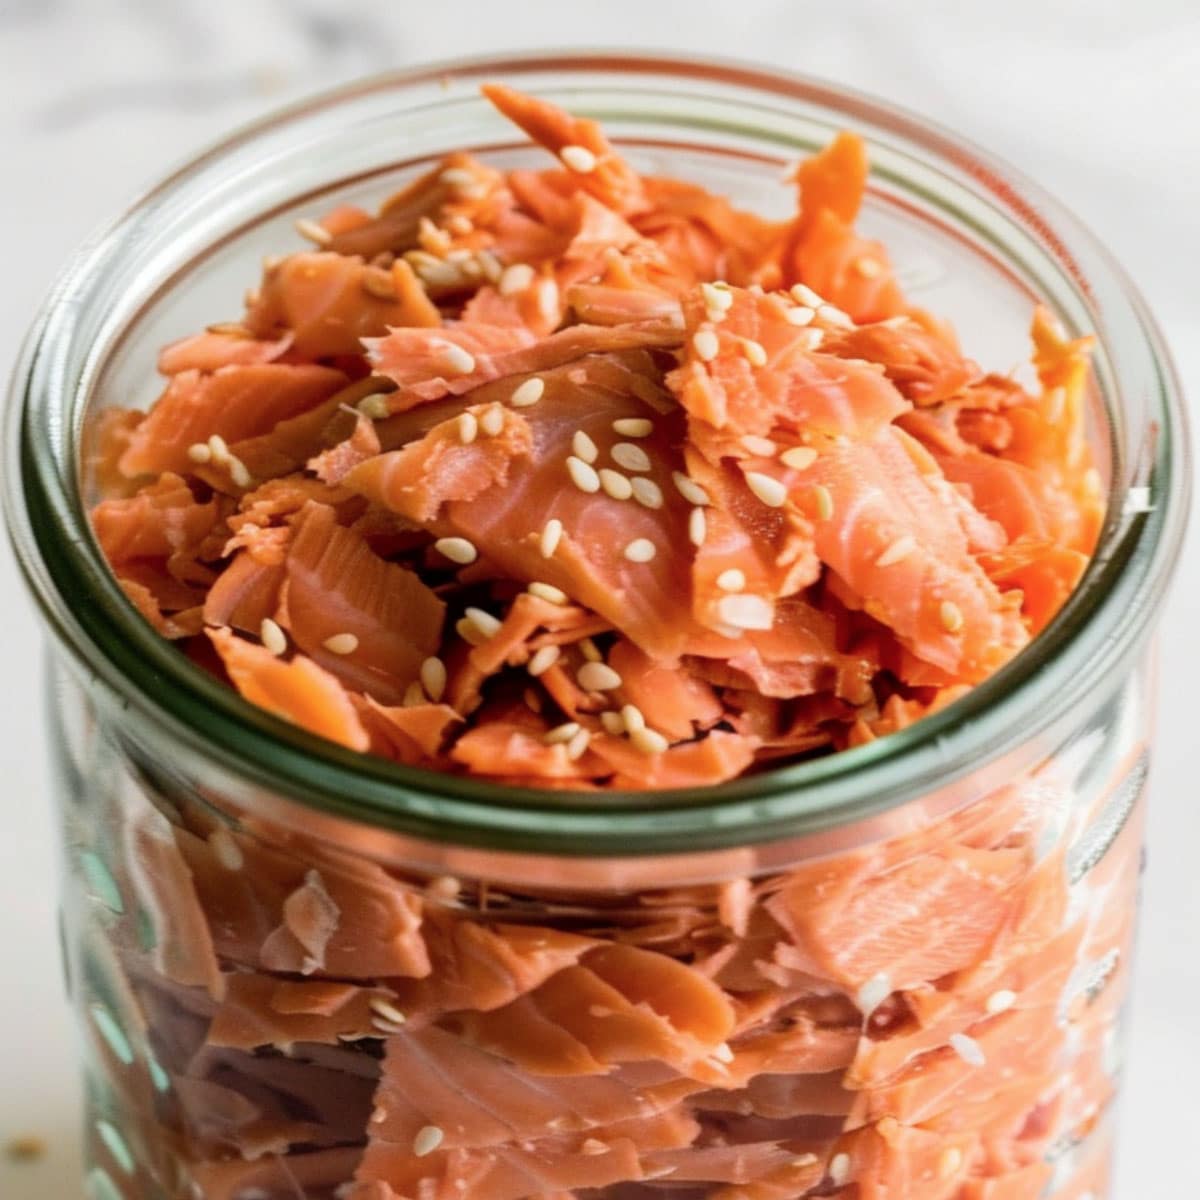 Image of a glass jar overflowing with homemade salmon flakes; ready for use in salads and sandwiches.